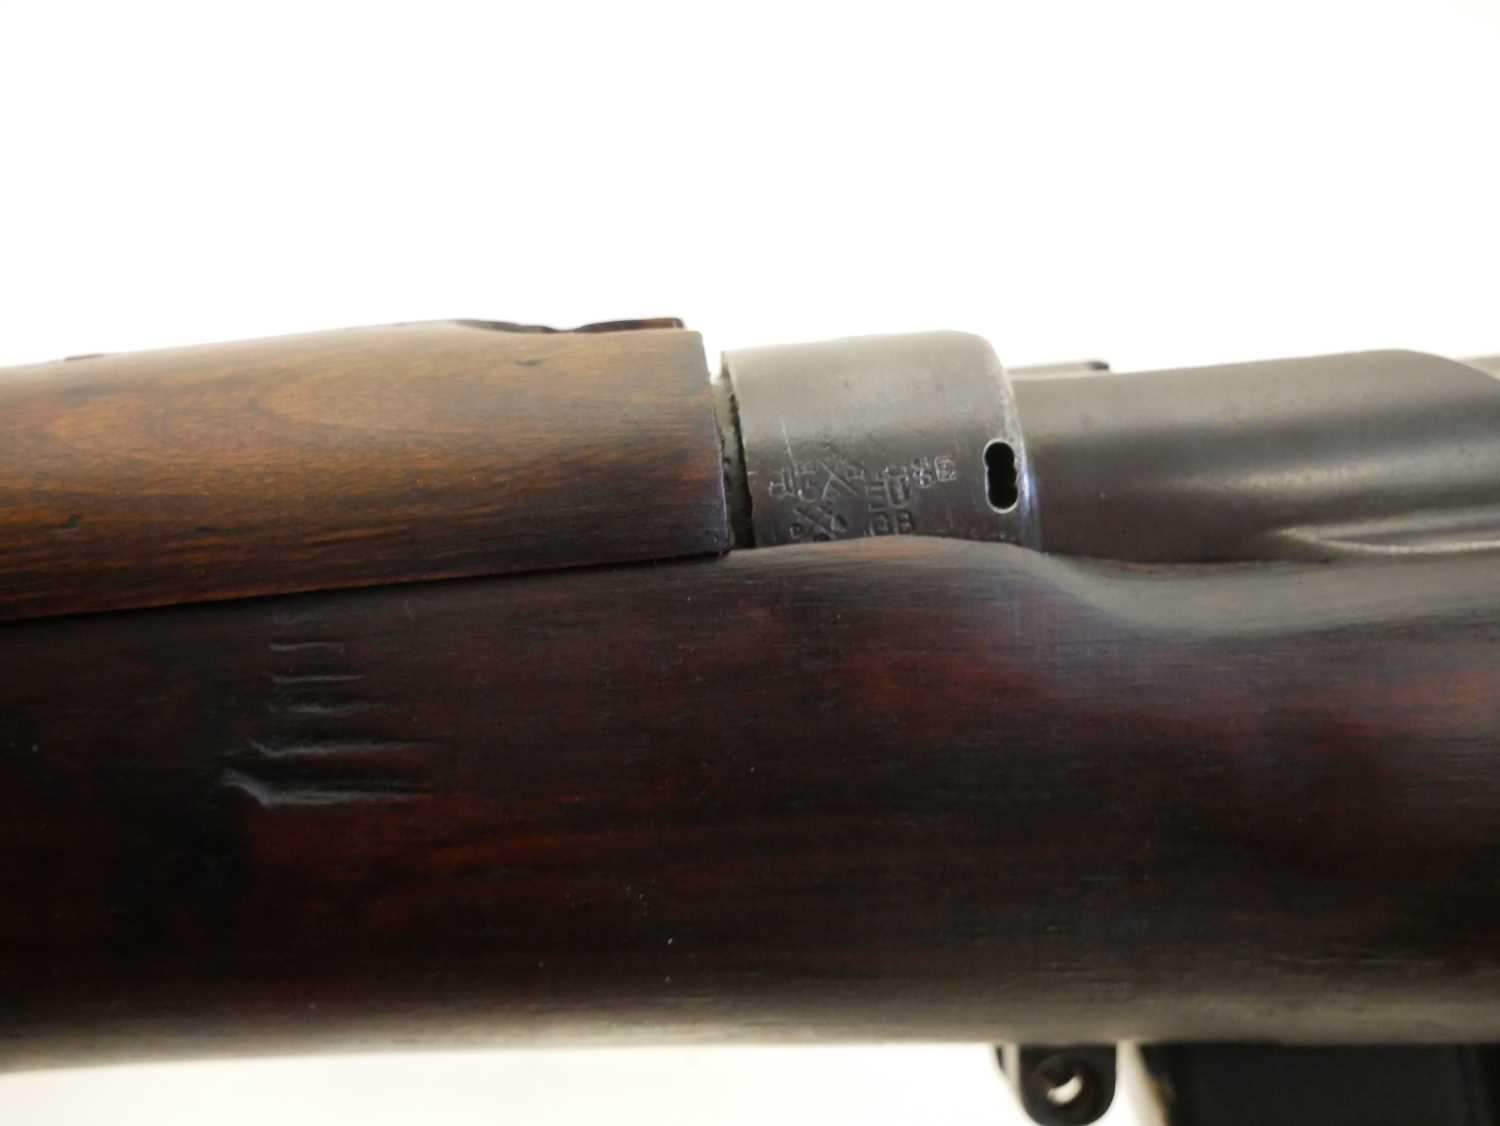 Deactivated Lee Enfield SMLE .303 bolt action rifle - Image 11 of 14